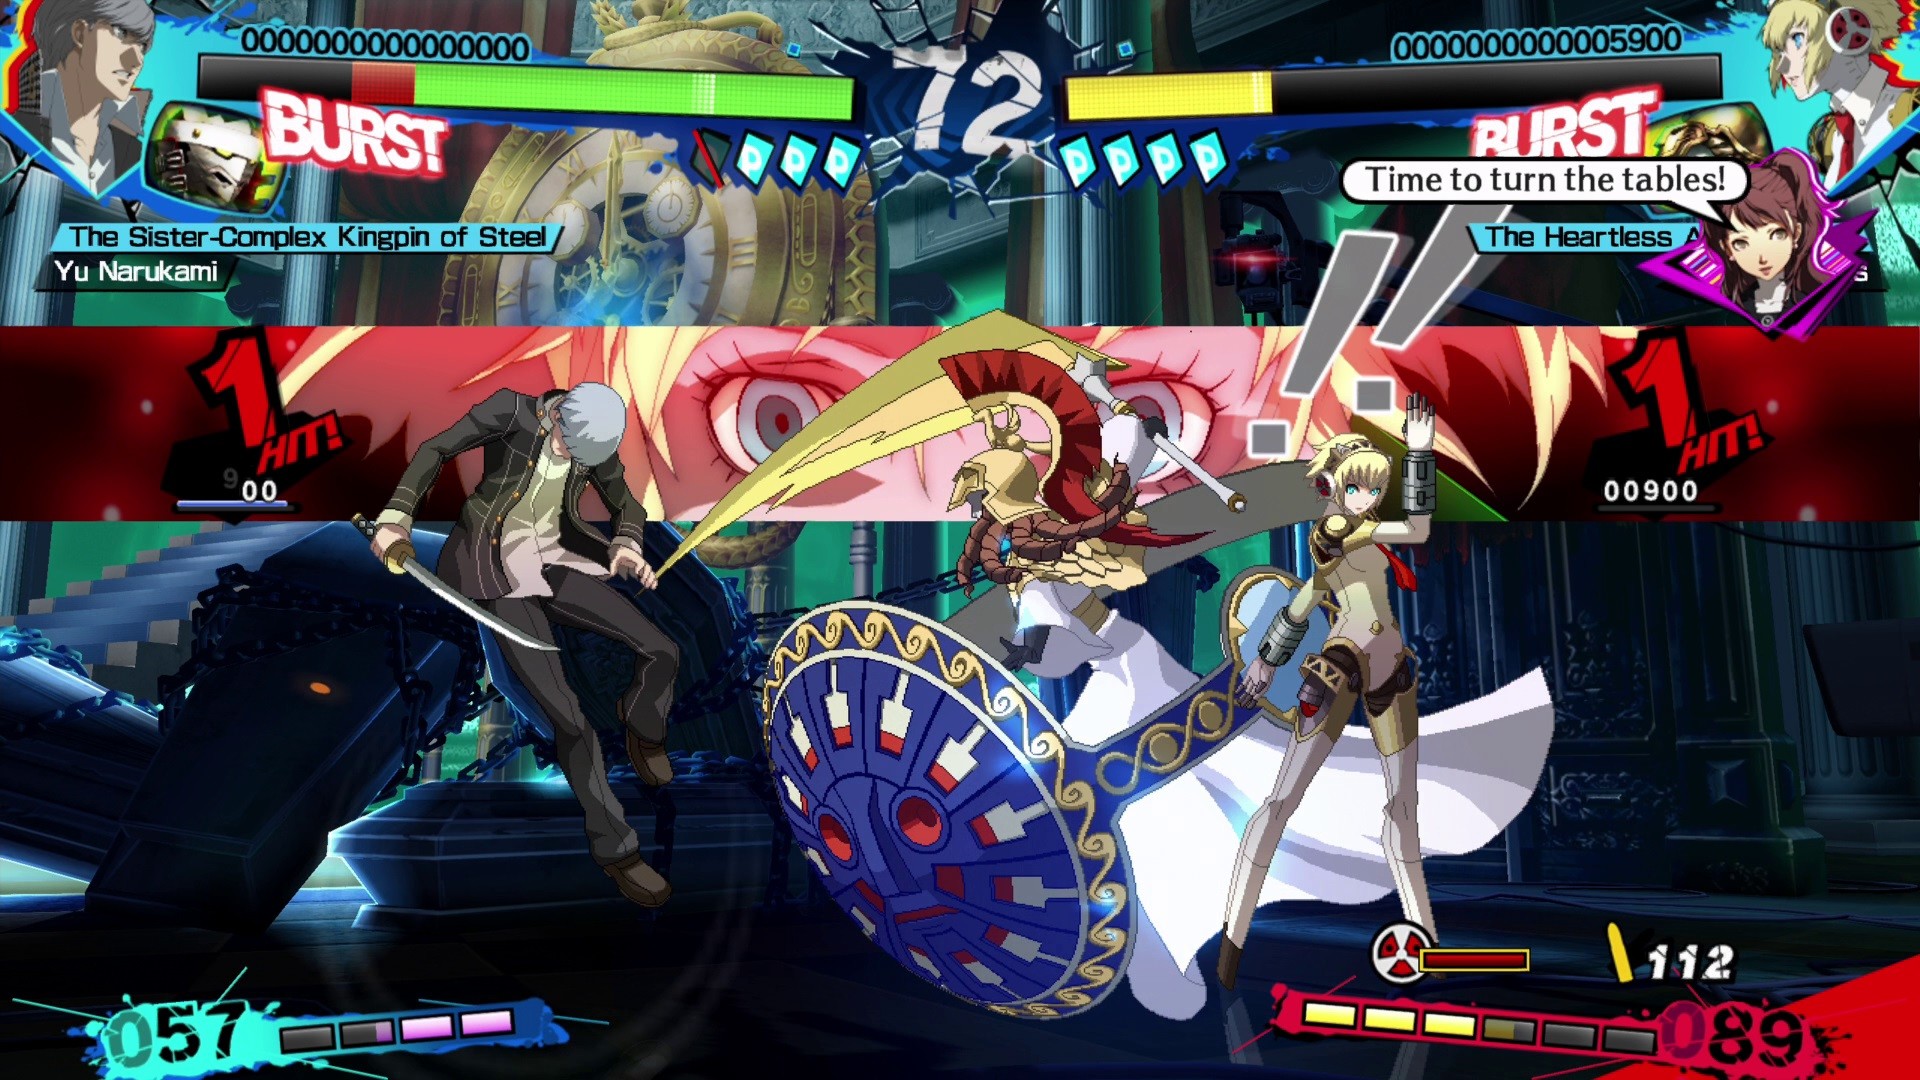 Is Persona 4 Arena or ultimax?